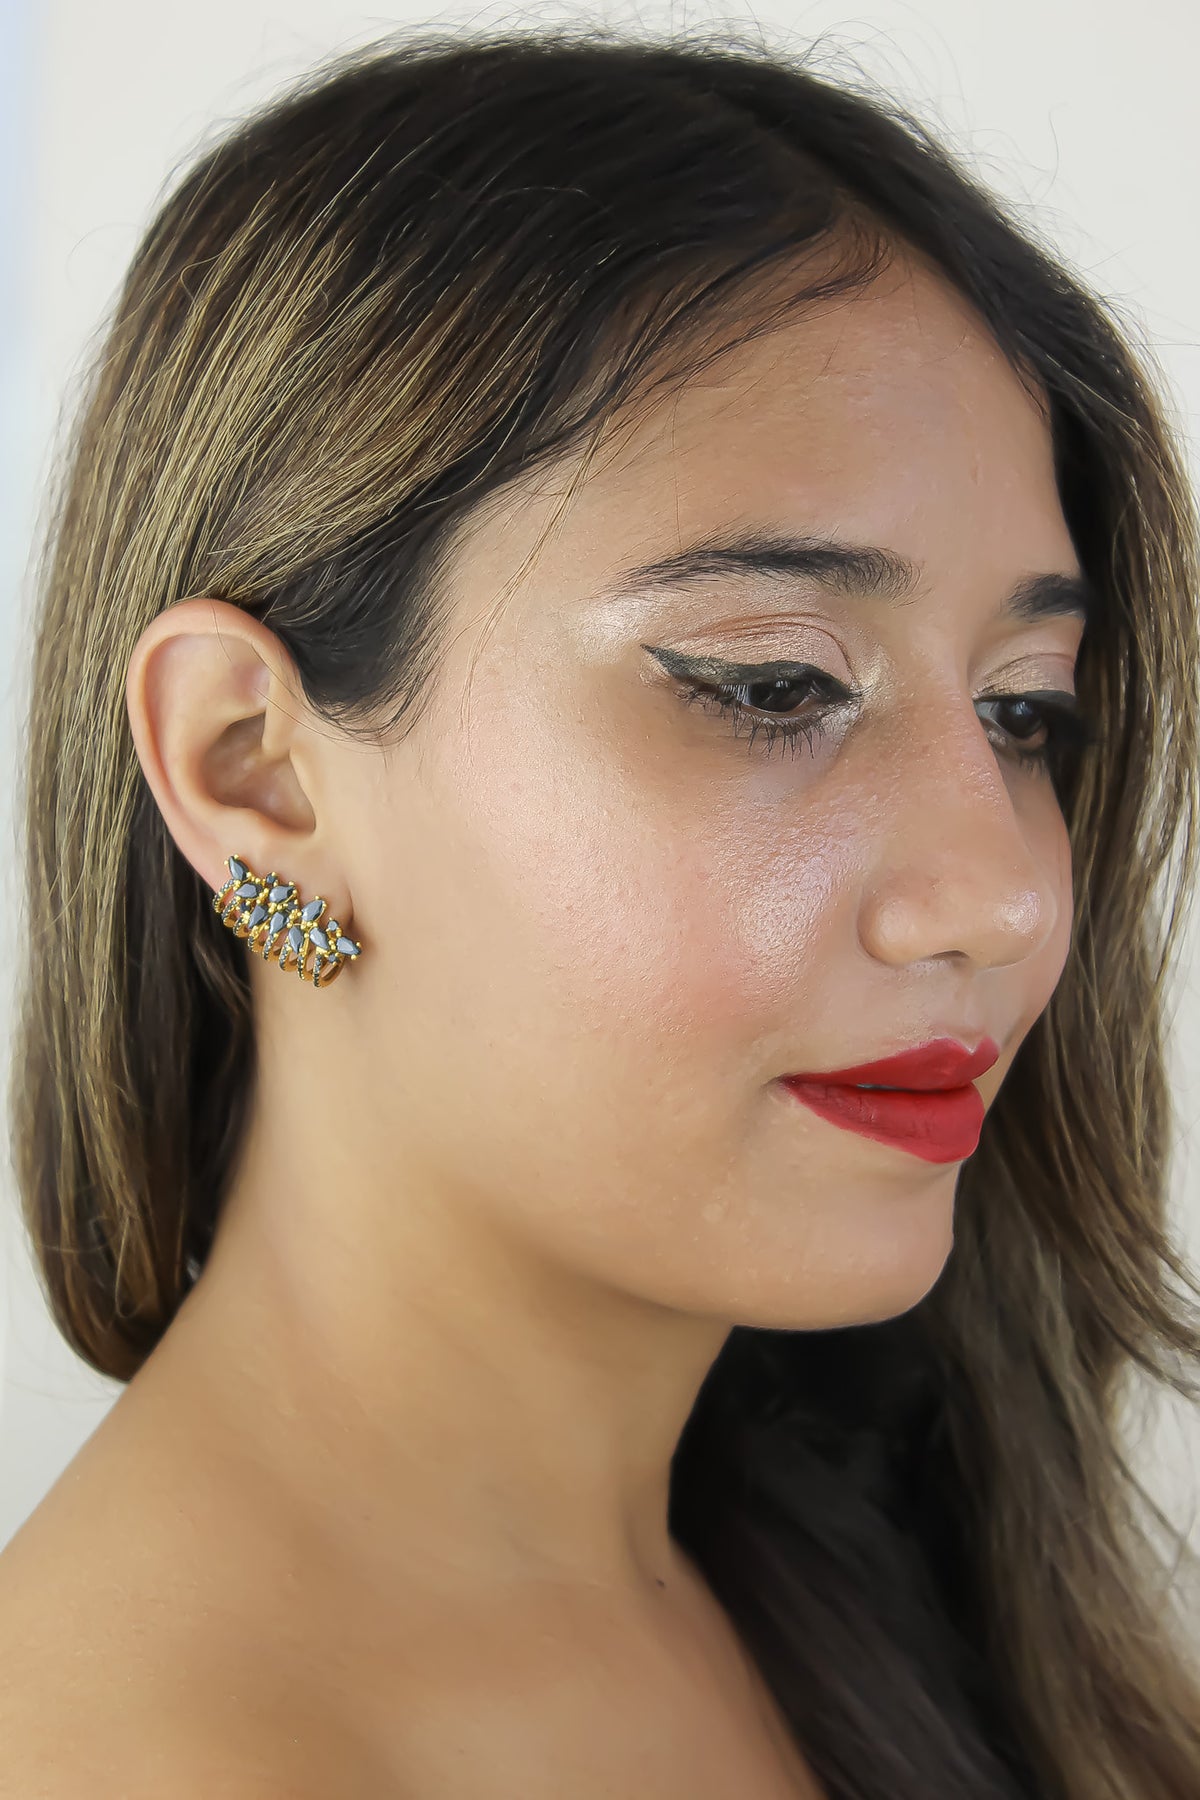 london climber earrings with stones Bombay Sunset